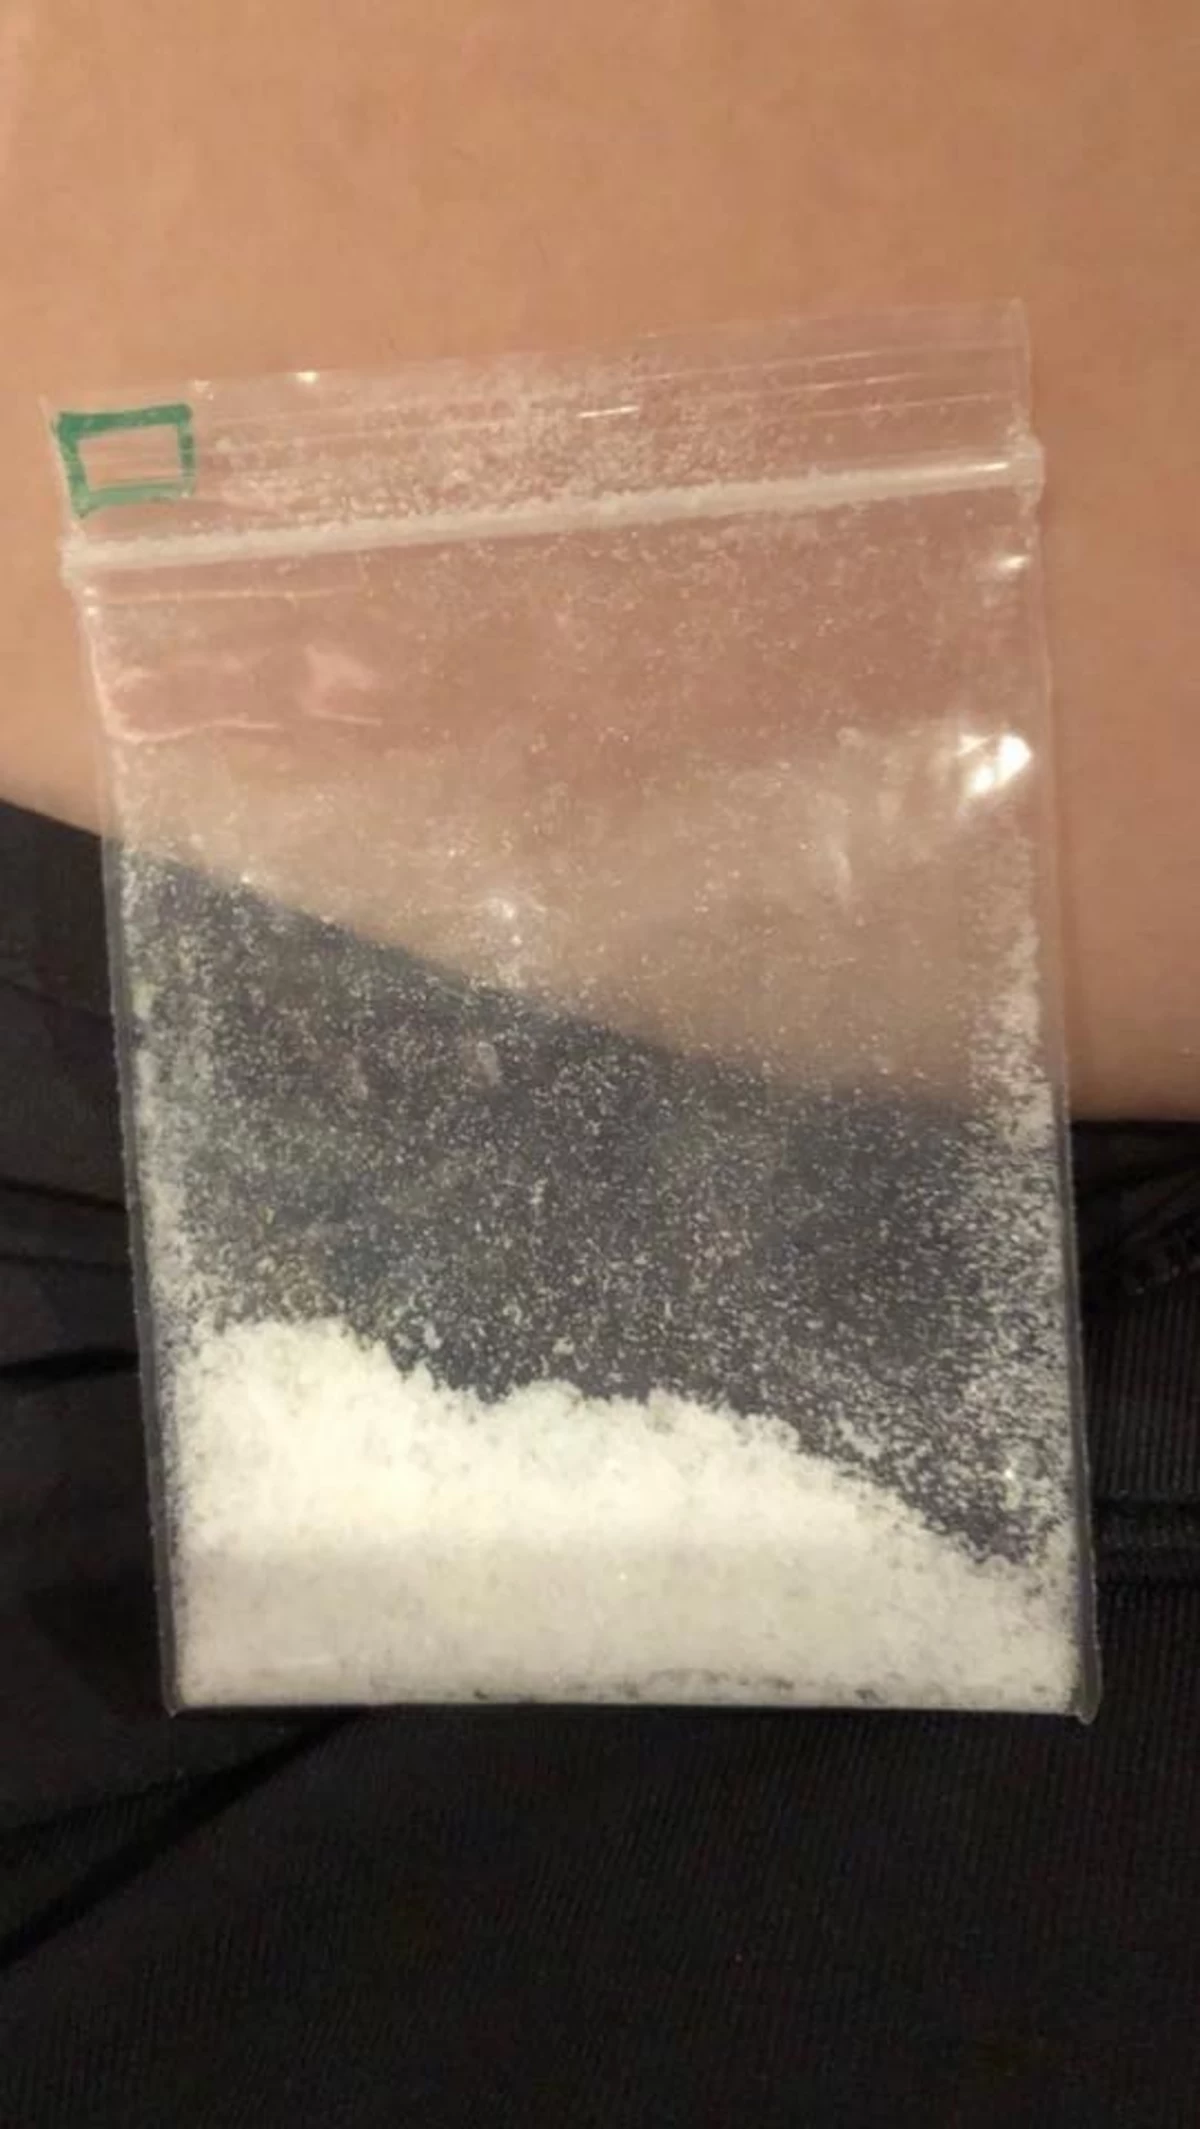 Roscommon Sheriff Wants to Reunite Bag of Meth with its Owner